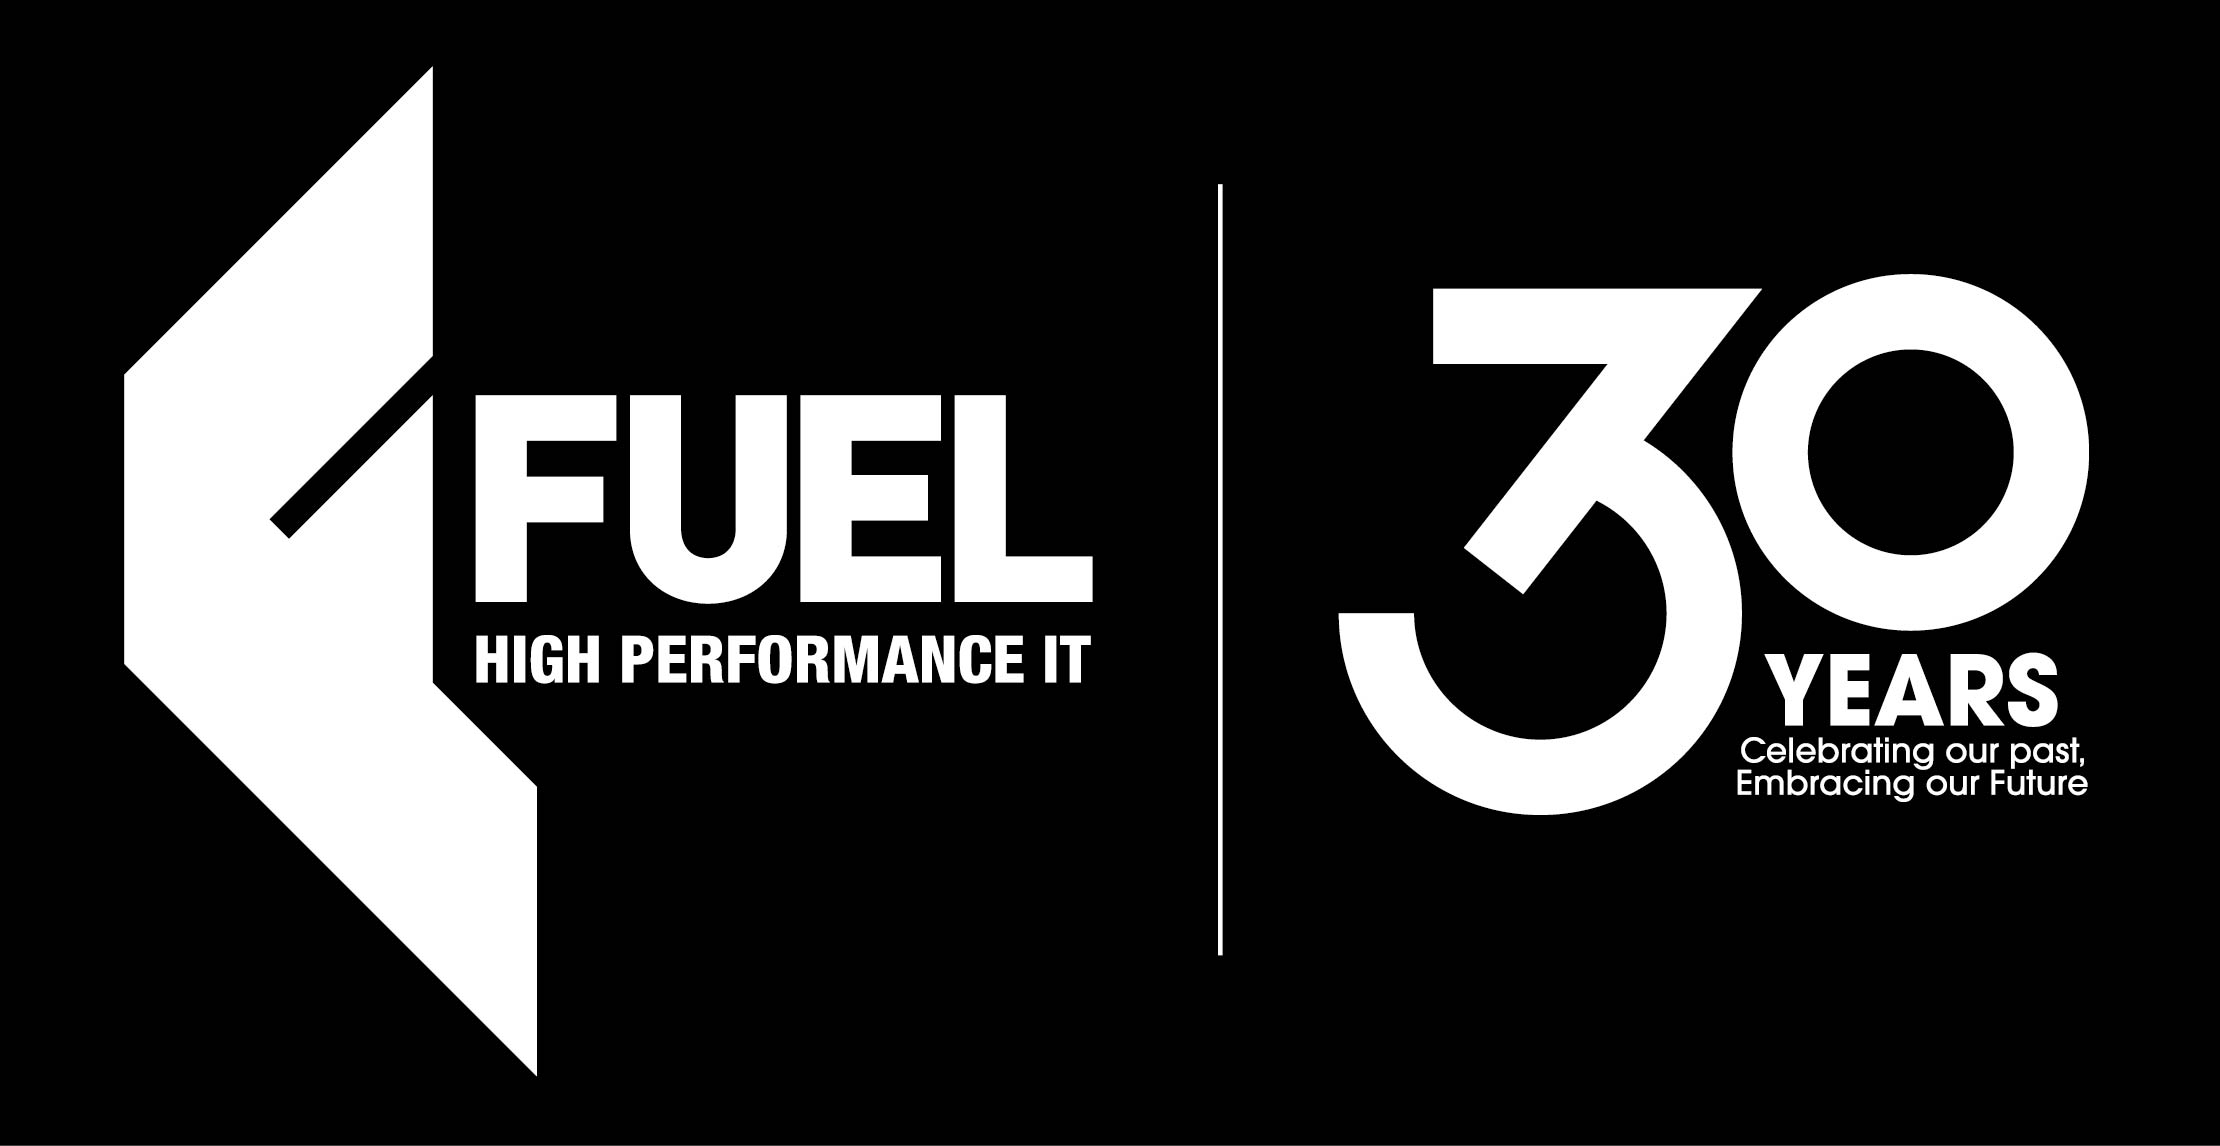 FUEL Celebrates 30 Years of Exceptional IT Services and Innovation